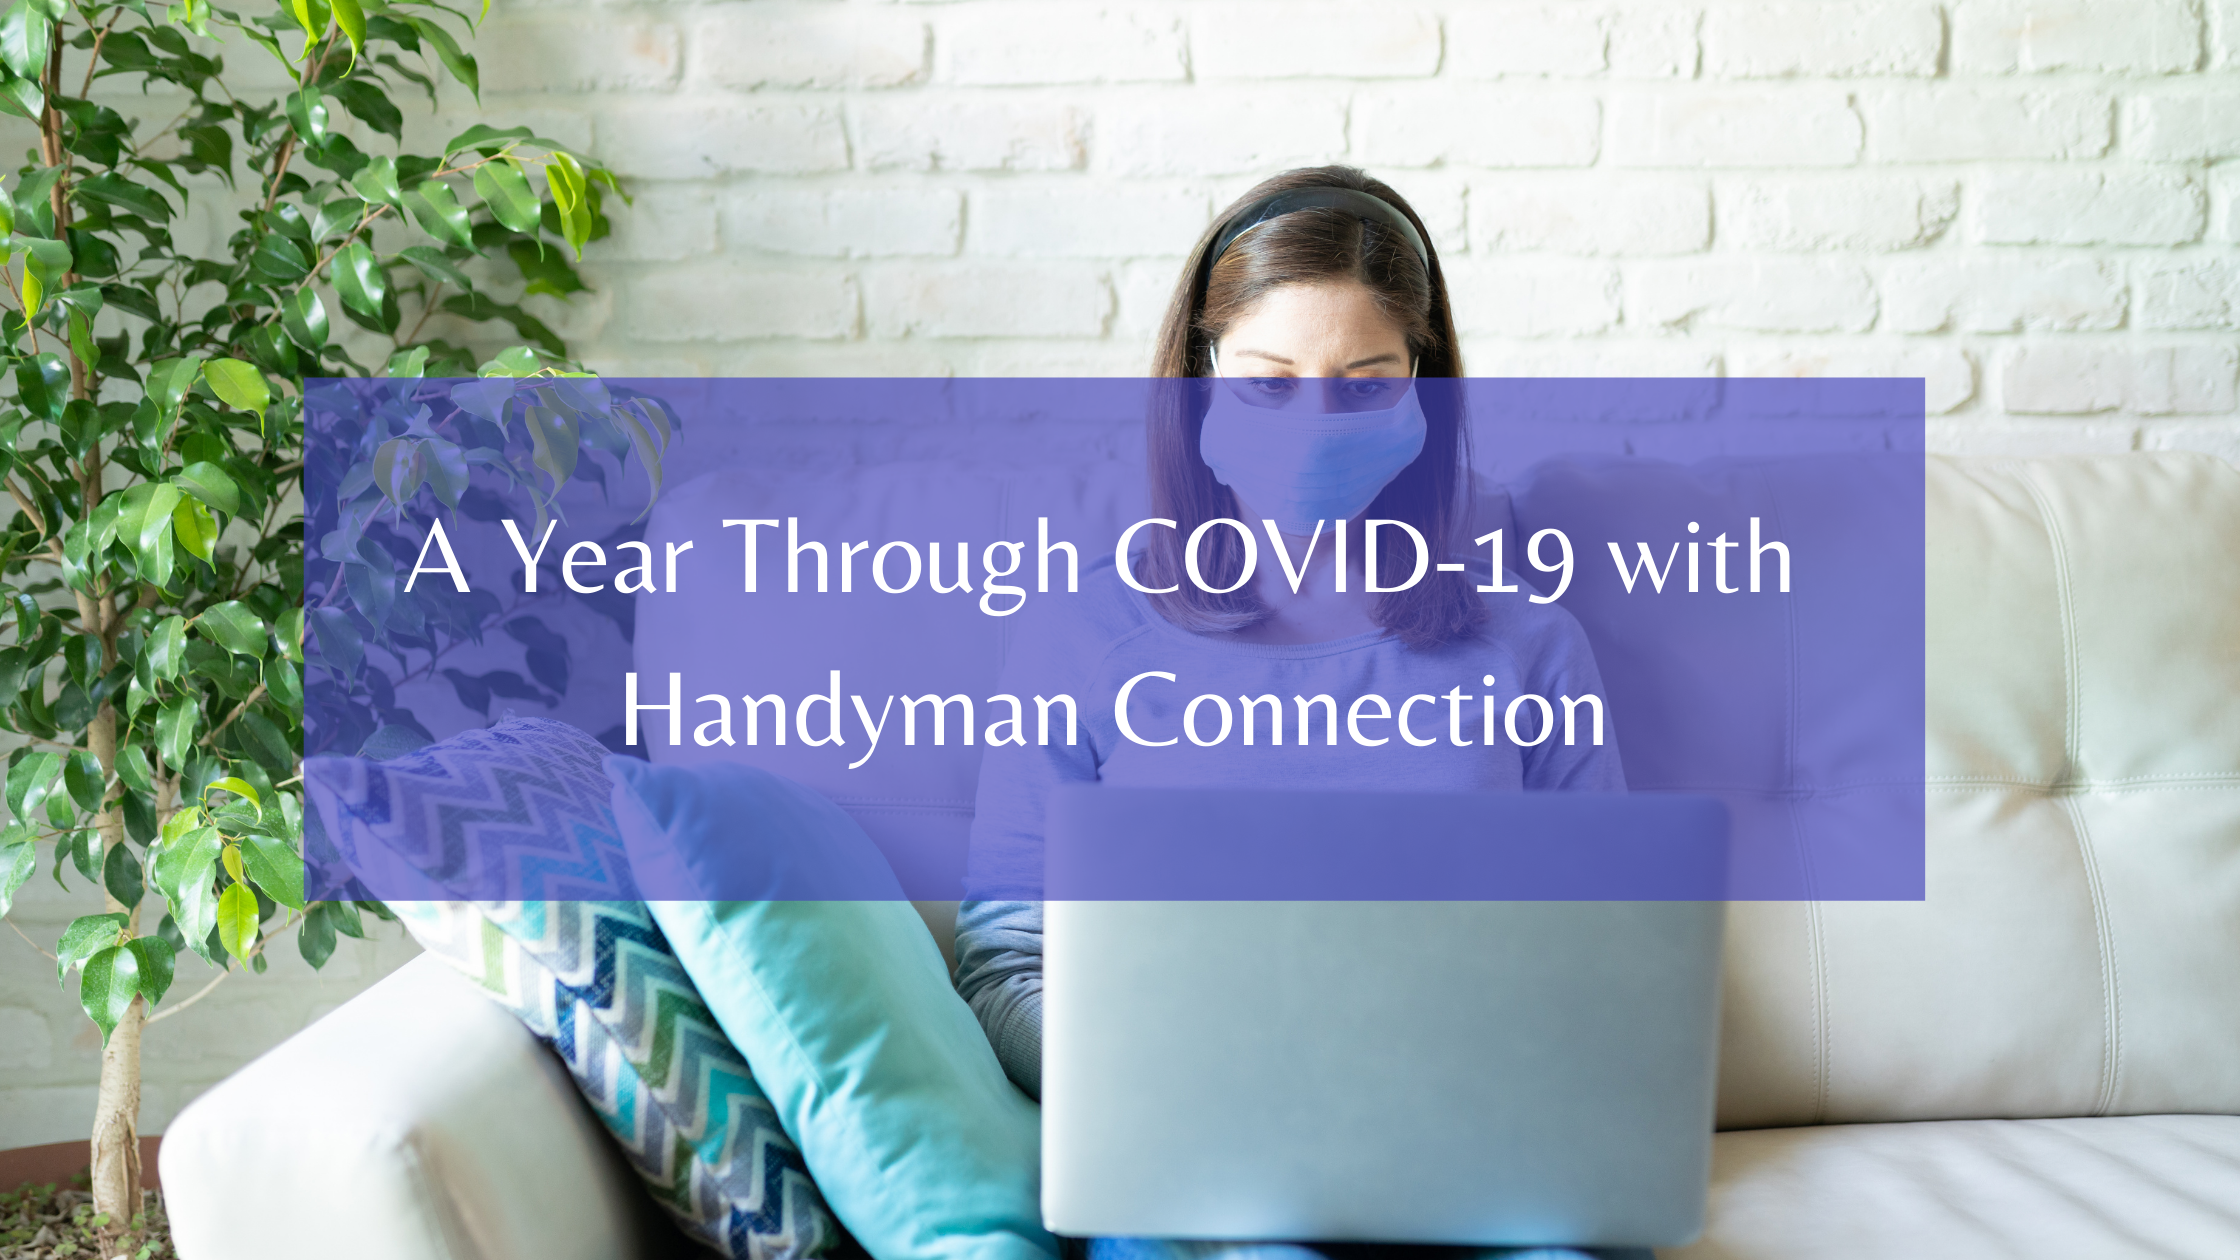 https://handymanconnection.com/wp-content/uploads/2021/05/A-Year-Through-COVID-19-with-Handyman-Connection.png